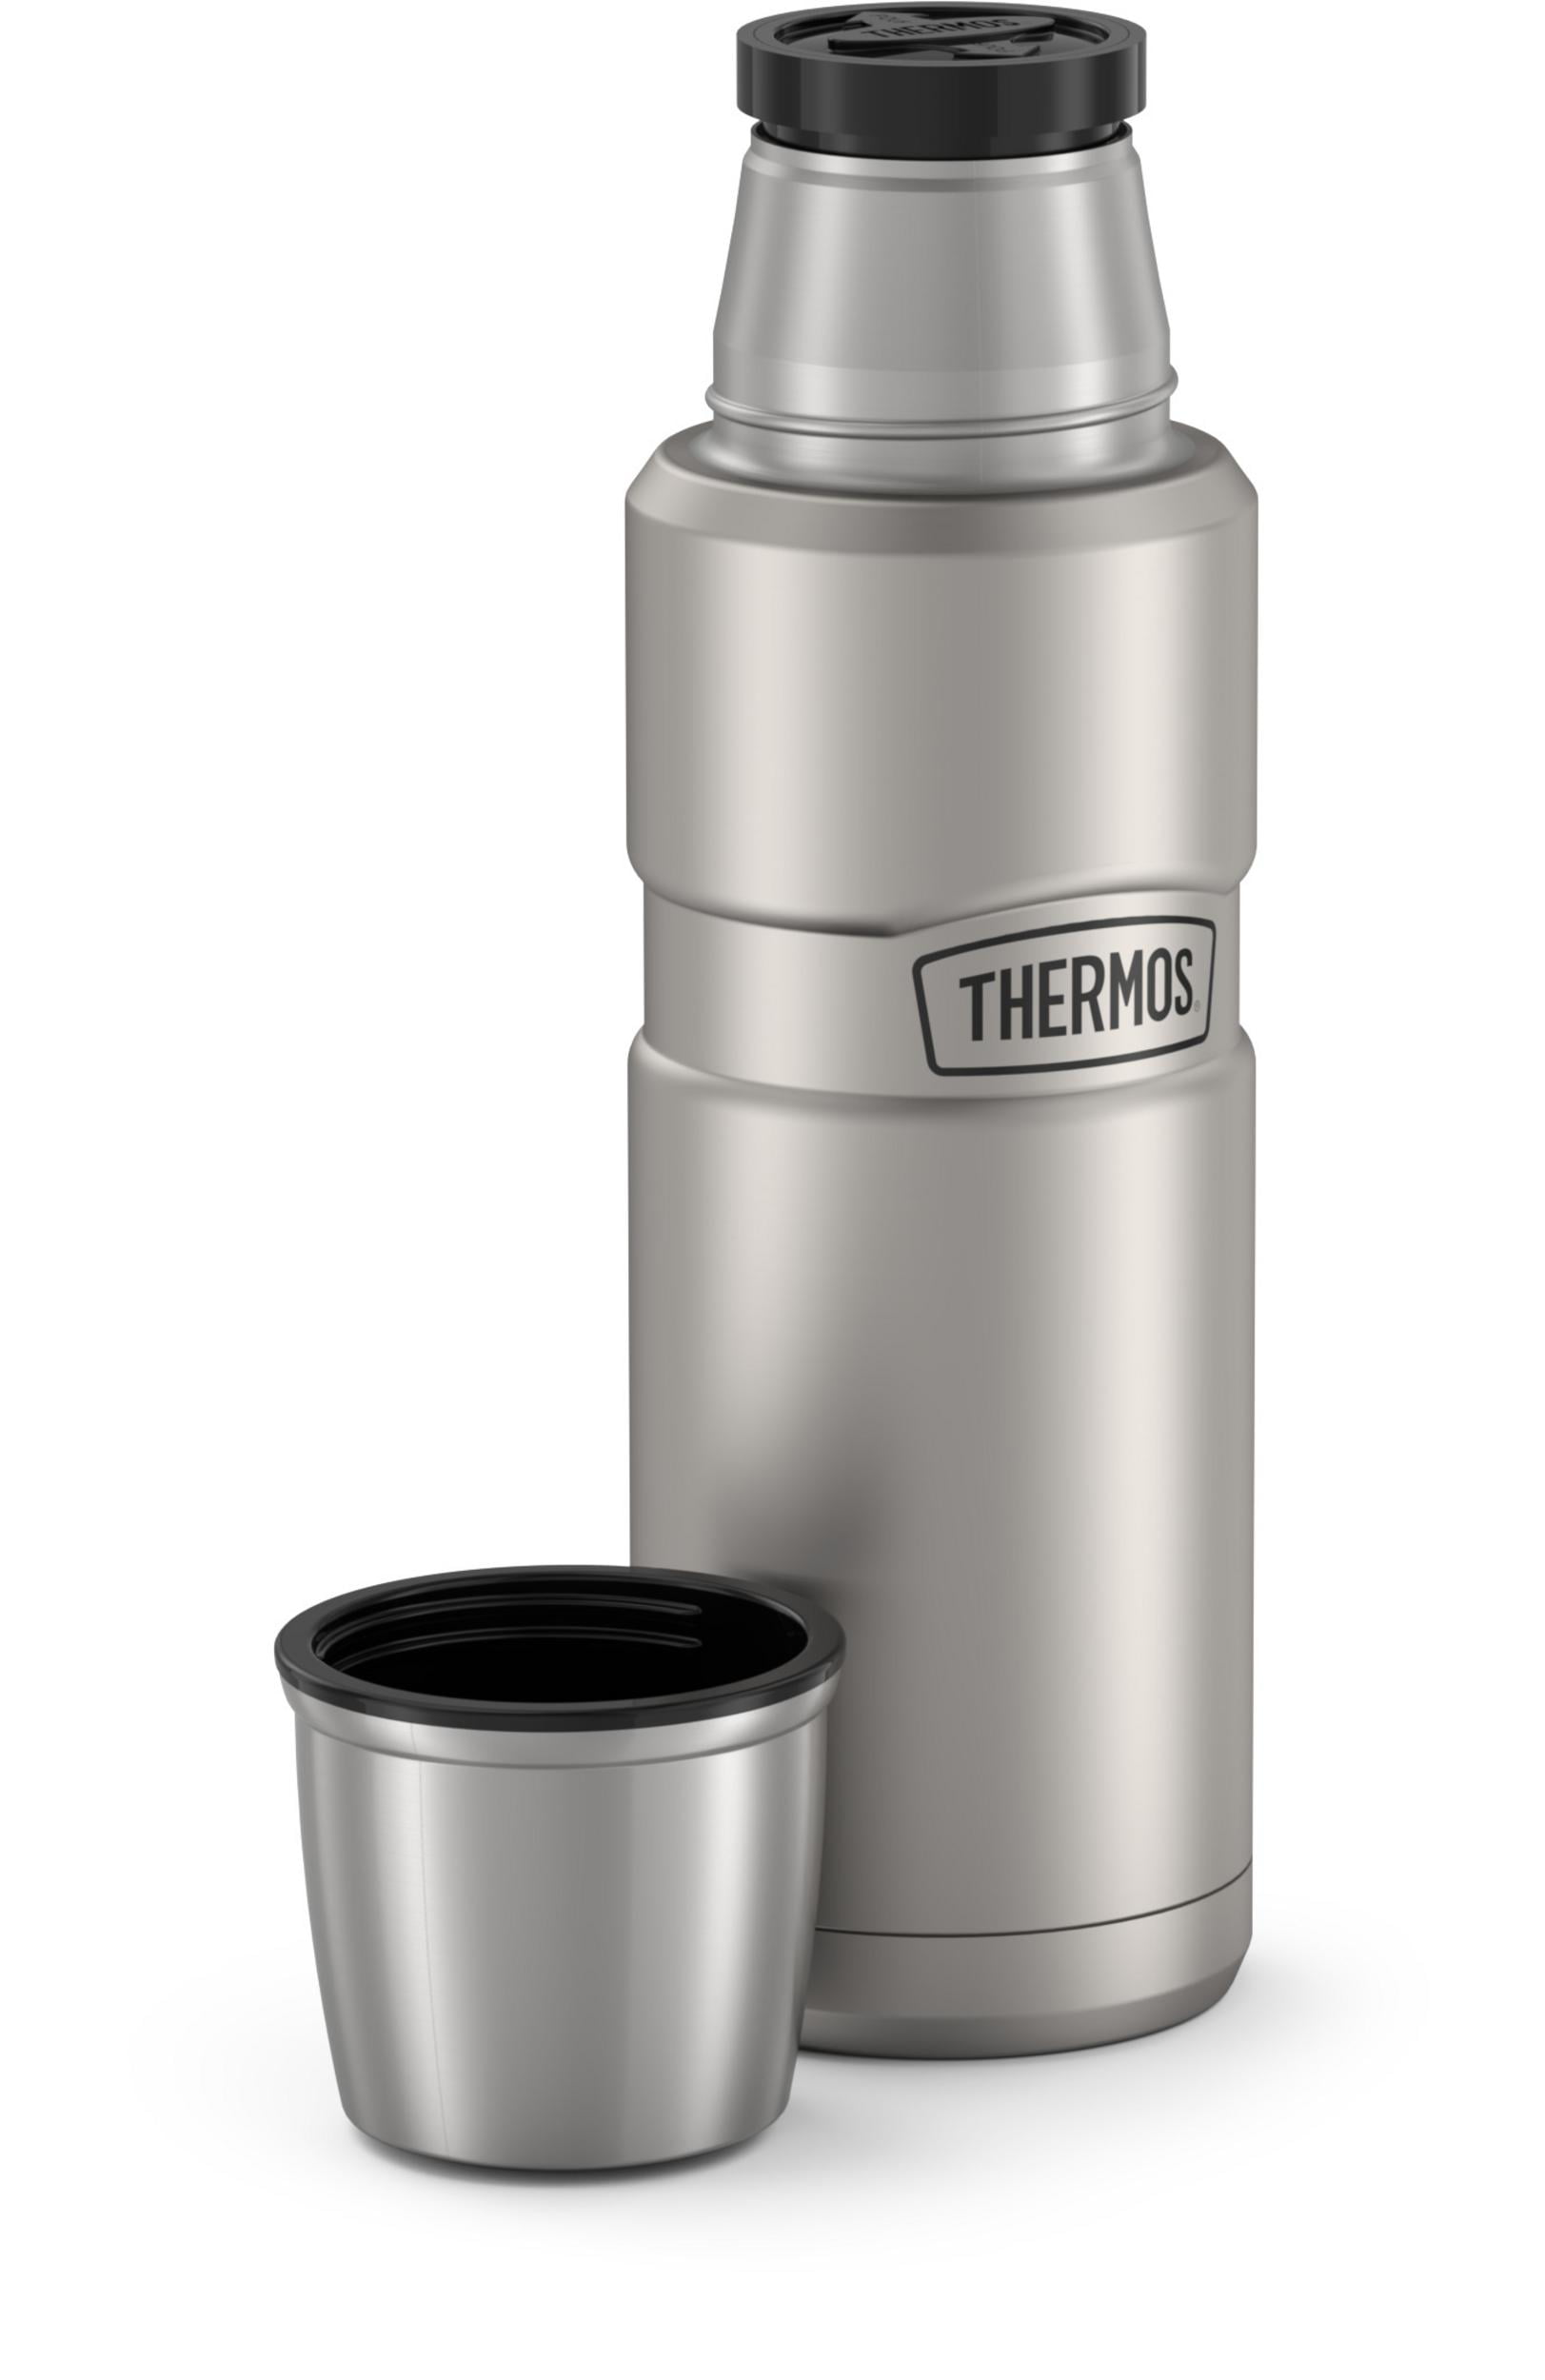 STAINLESS STEEL FLASK HOT COLD THERMOS LID CUP TEA COFFEE DRINK CAMPING BOTTLE 